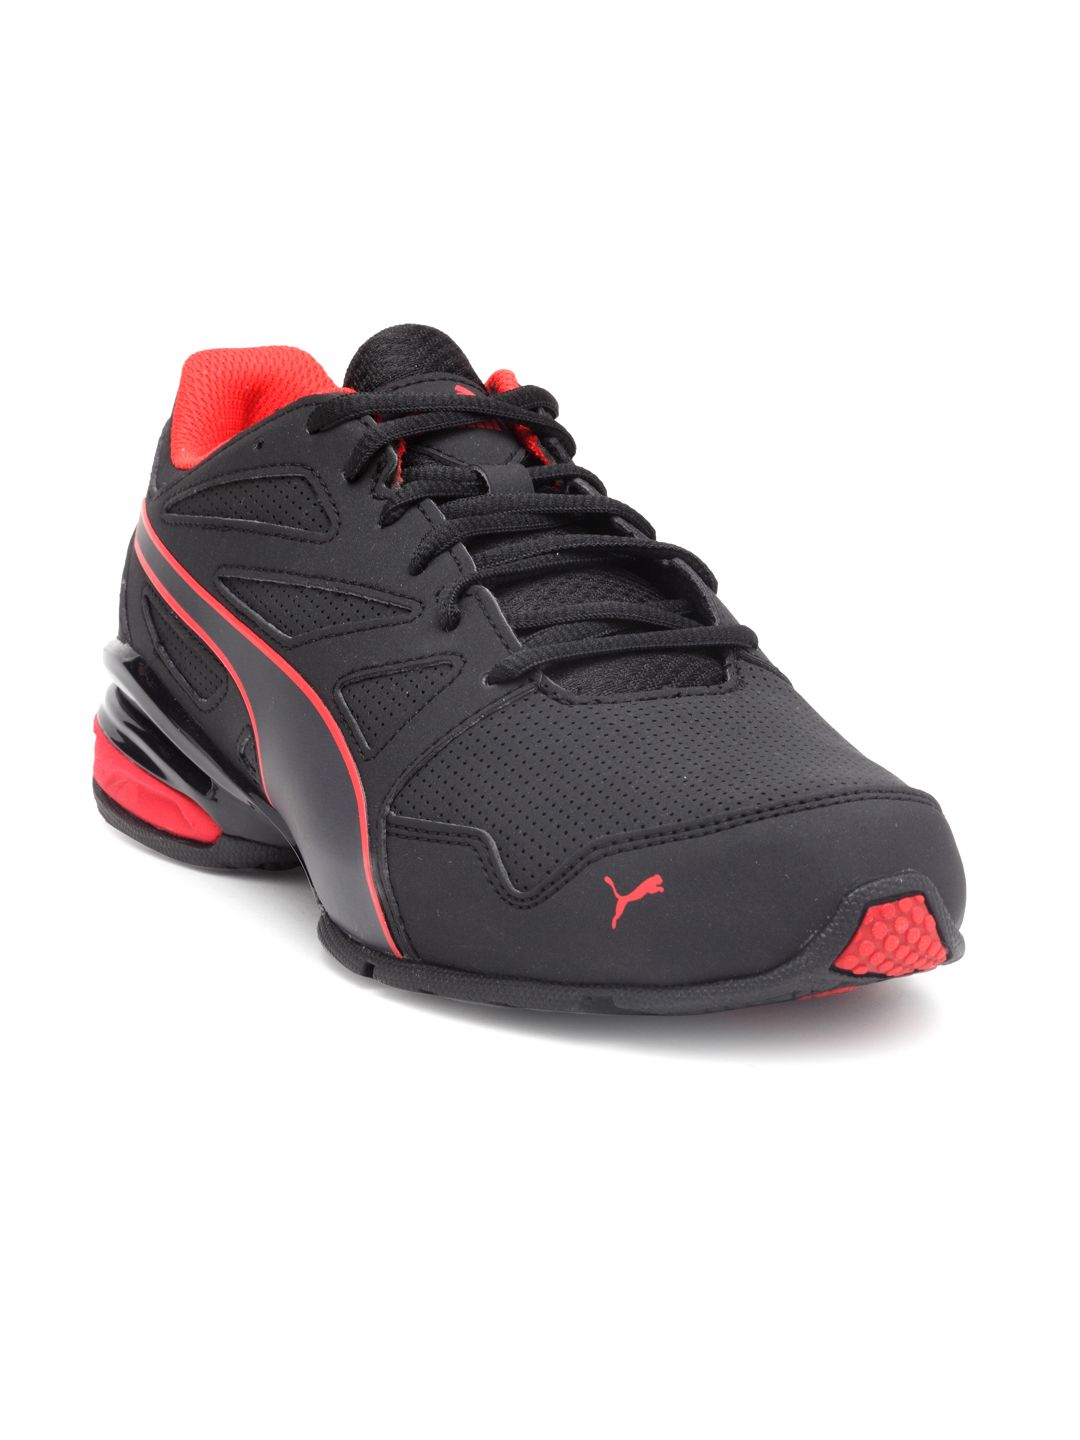 Puma Tazonmodernsl Black Running Shoes for Men online in India at Best price on 8th November ...